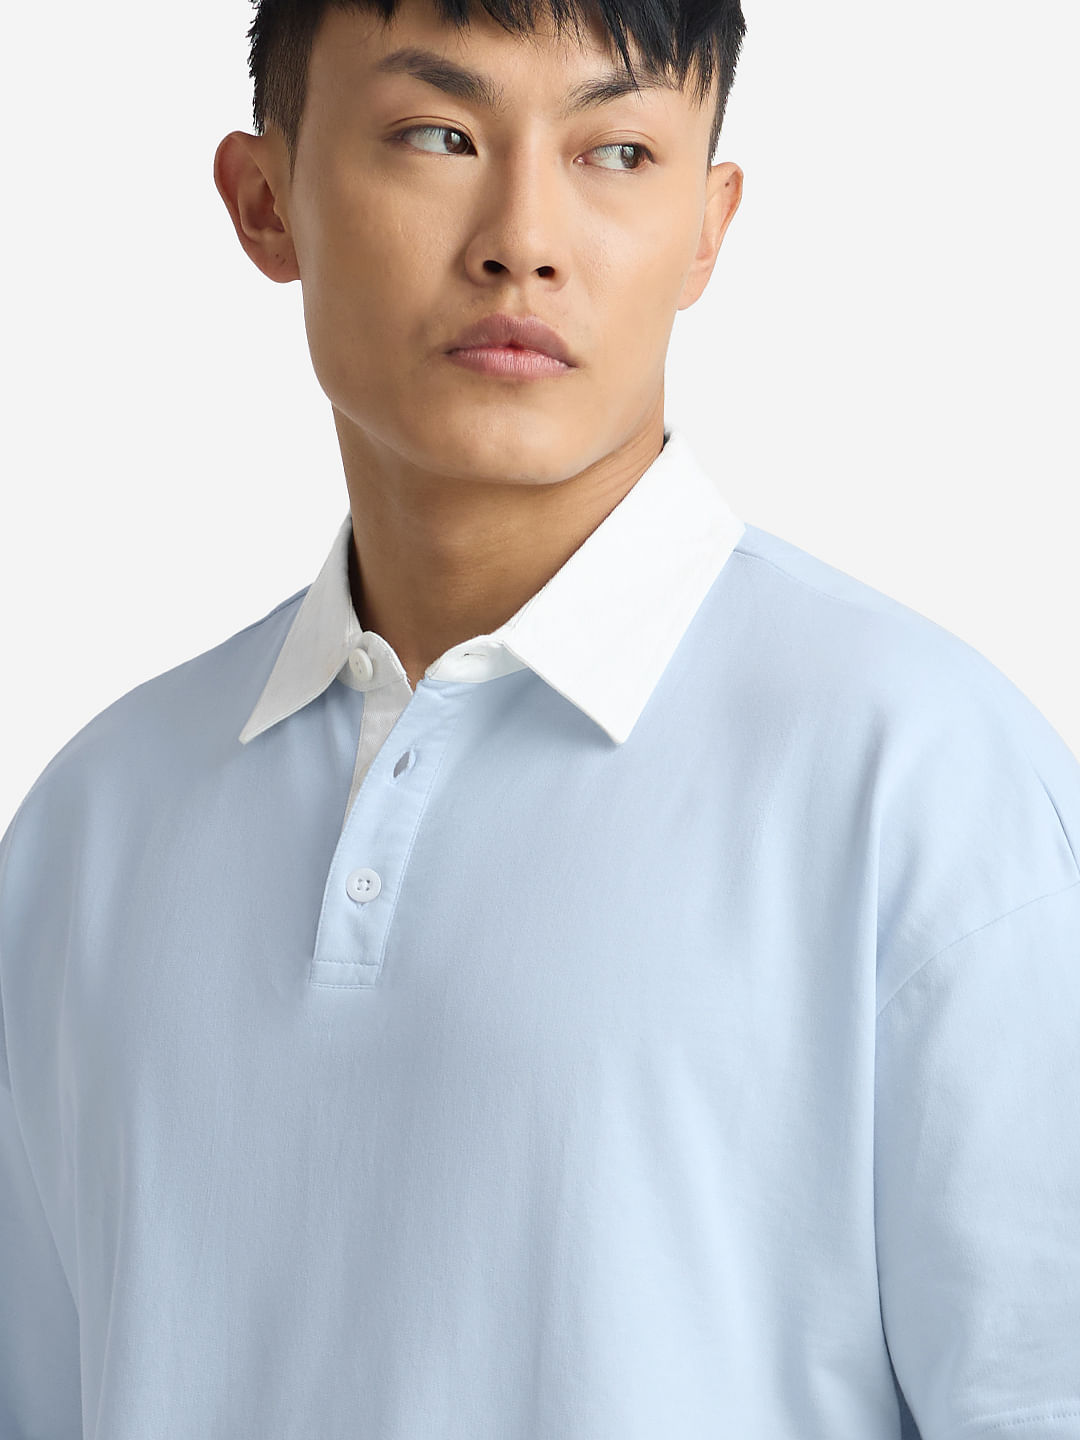 Buy Solids: Powder Blue Oversized Polo Online